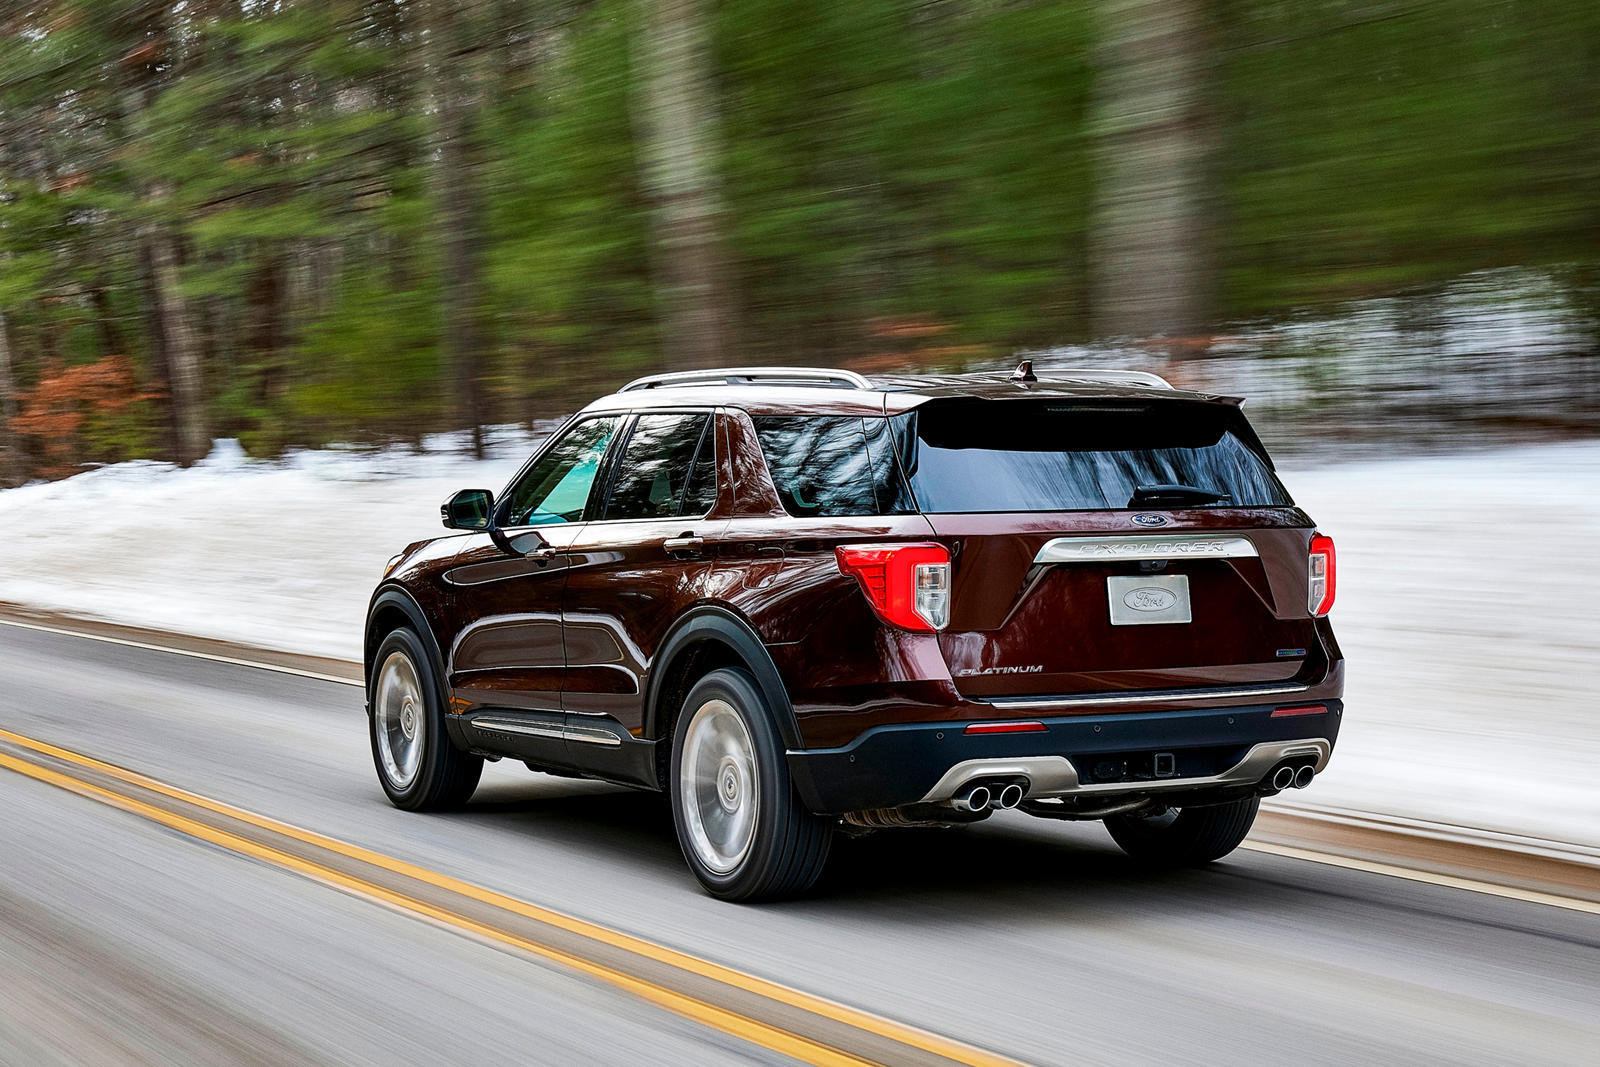 2021 Ford Explorer Review | New Ford Explorer SUV - Price, MPG, Towing 2021 Ford Explorer 4 Cylinder Towing Capacity